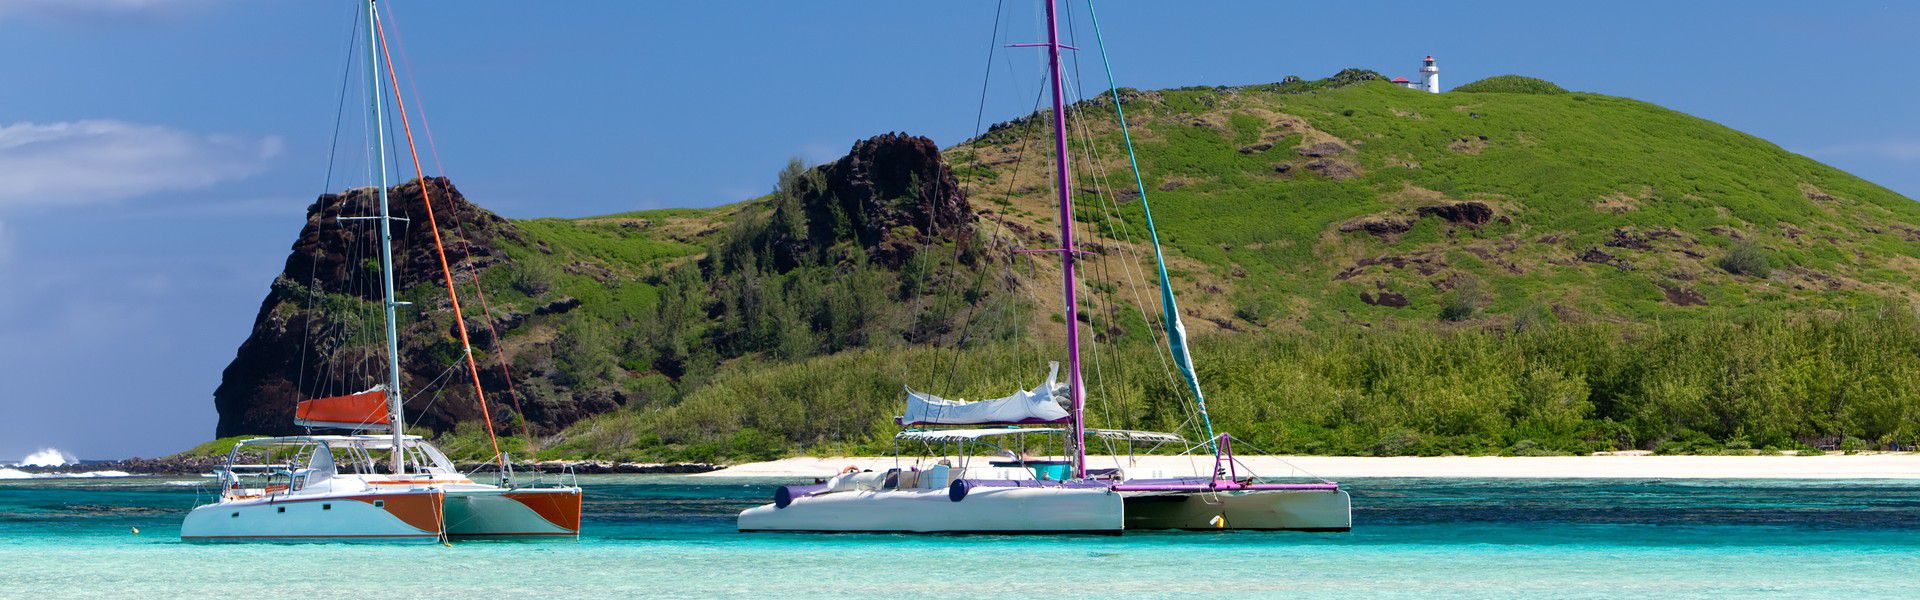 Mauritius is one of the best places for catamarans trips. Having great buoyancy and stability, catamarans are perfect for group cruises, for they can easily dock and anchor in the shallow bays and very close to the beautiful beaches and islets of Mauritius. It is the ideal way to sail the waters of the island and enjoy its picturesque panorama in complete safety and comfort. Those who dream of going for a catamaran cruise in Mauritius should definitely take the plunge, they will not regret it!